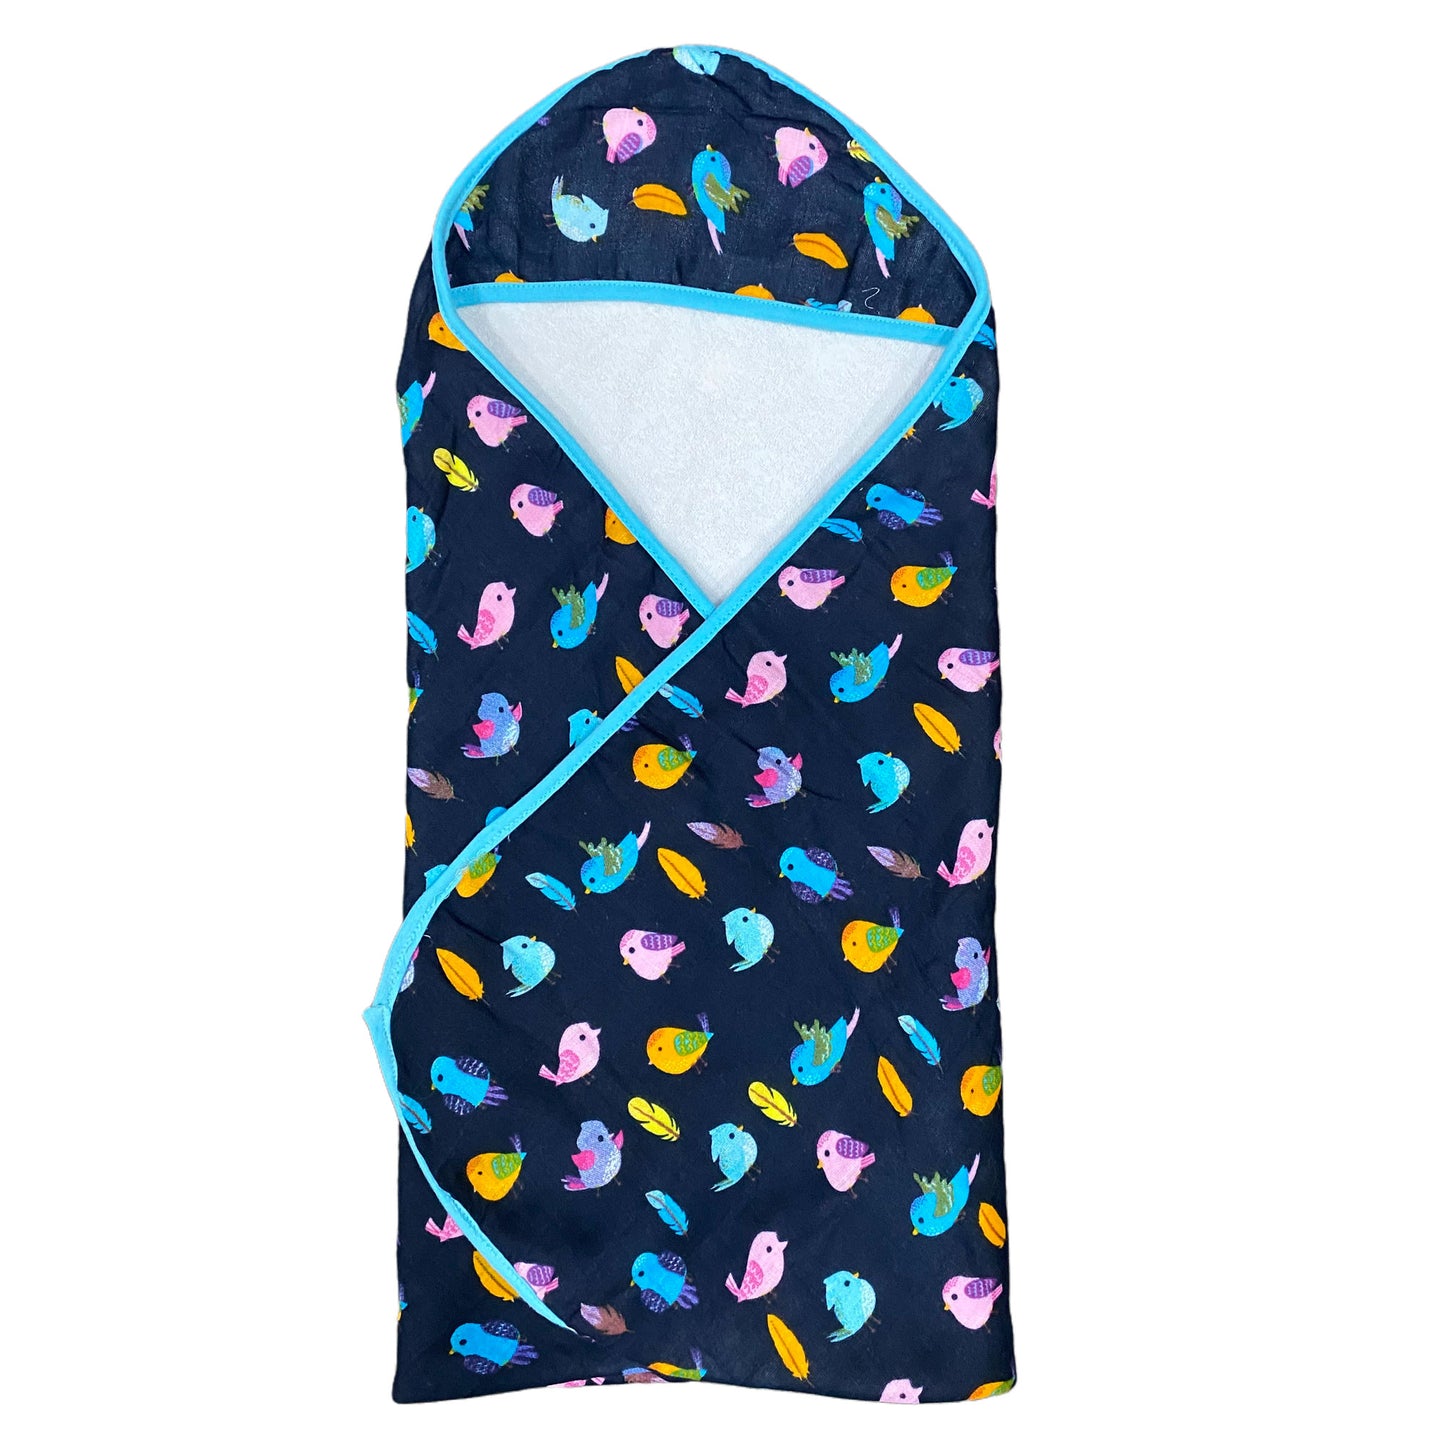 POLKA TOTS Soft Organic Dual Layer Muslin Cotton and Terry Hooded Baby Towel Soft Absorbent (Bird)